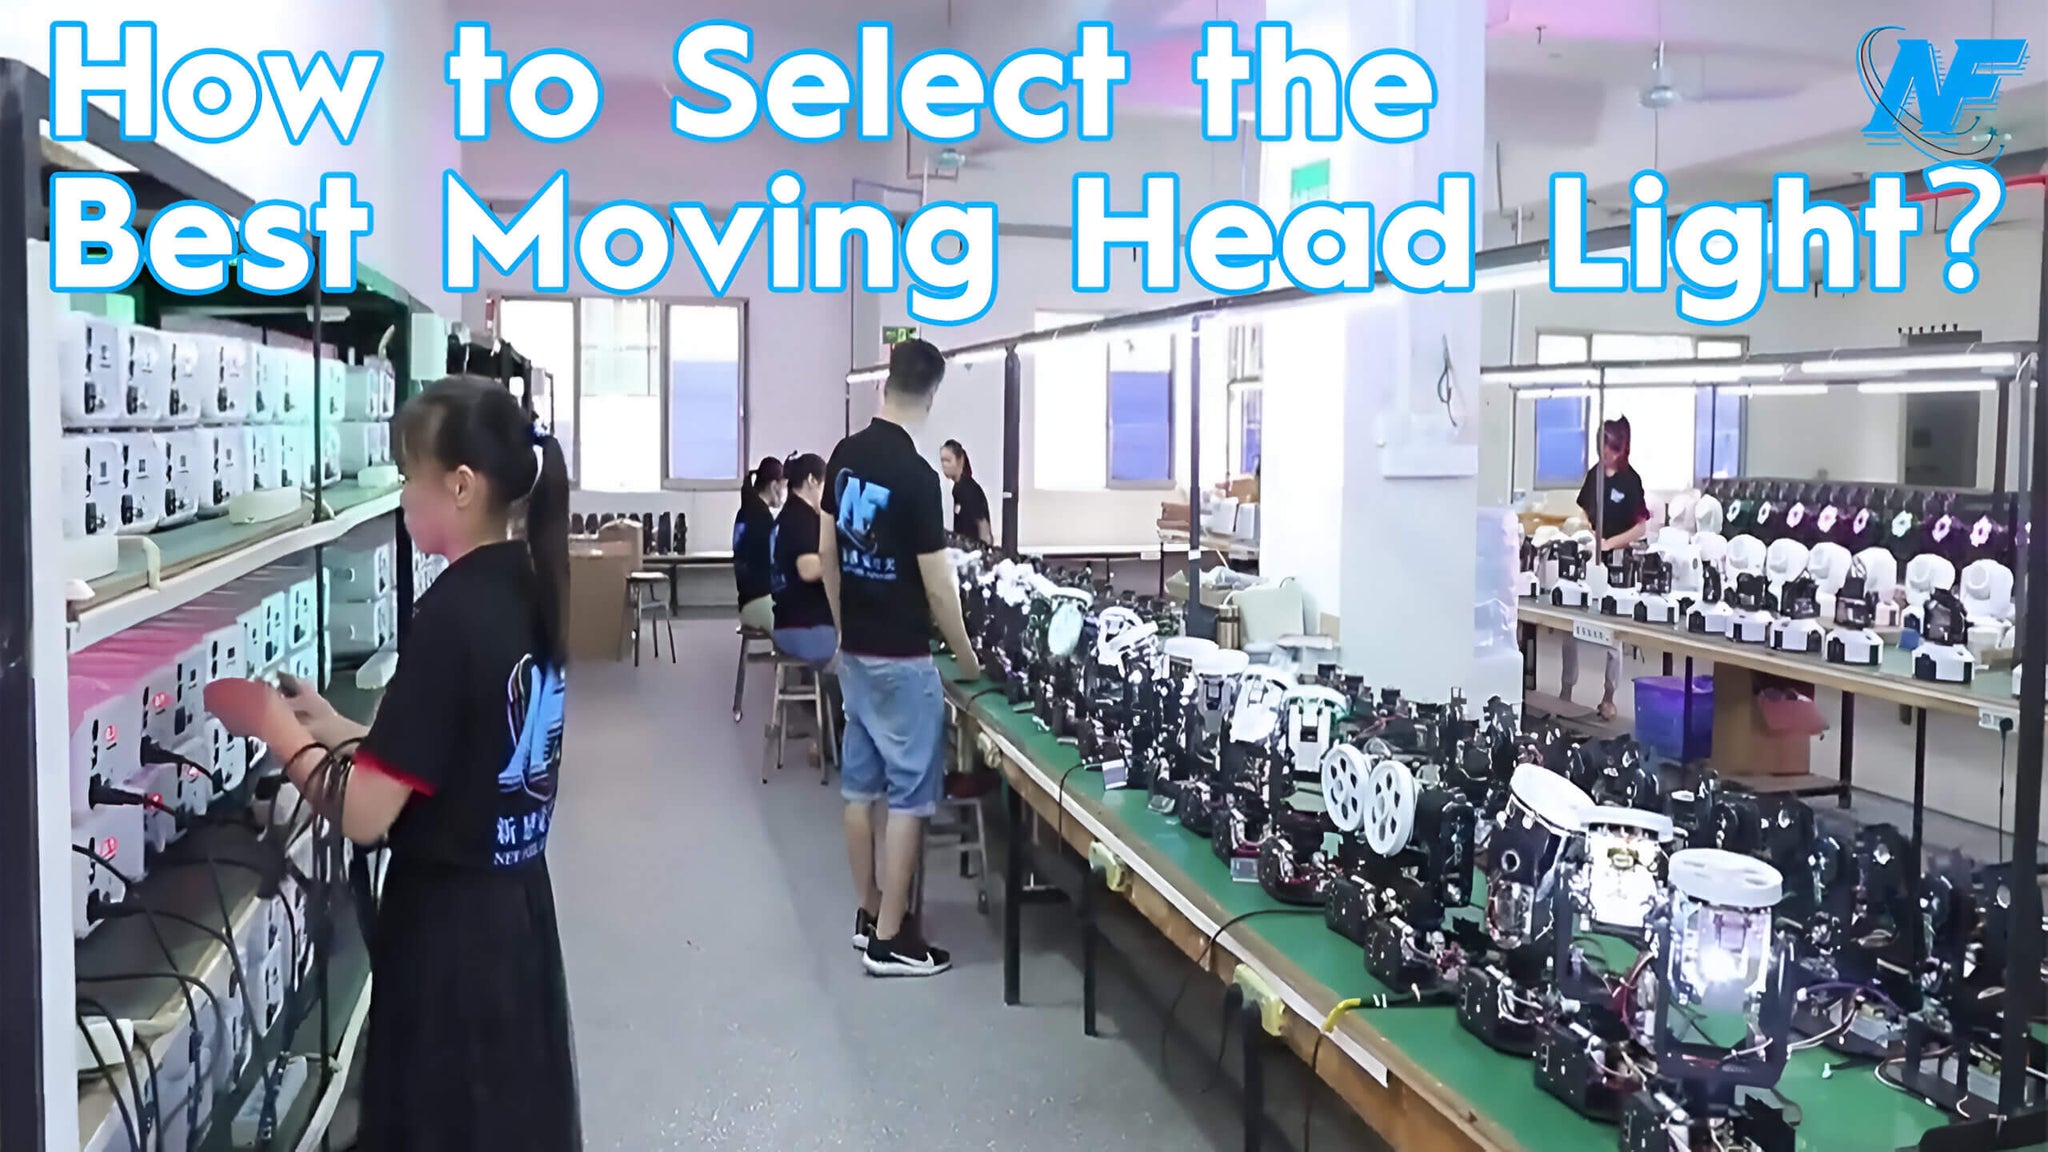 How to Select the Best Moving Head Light?